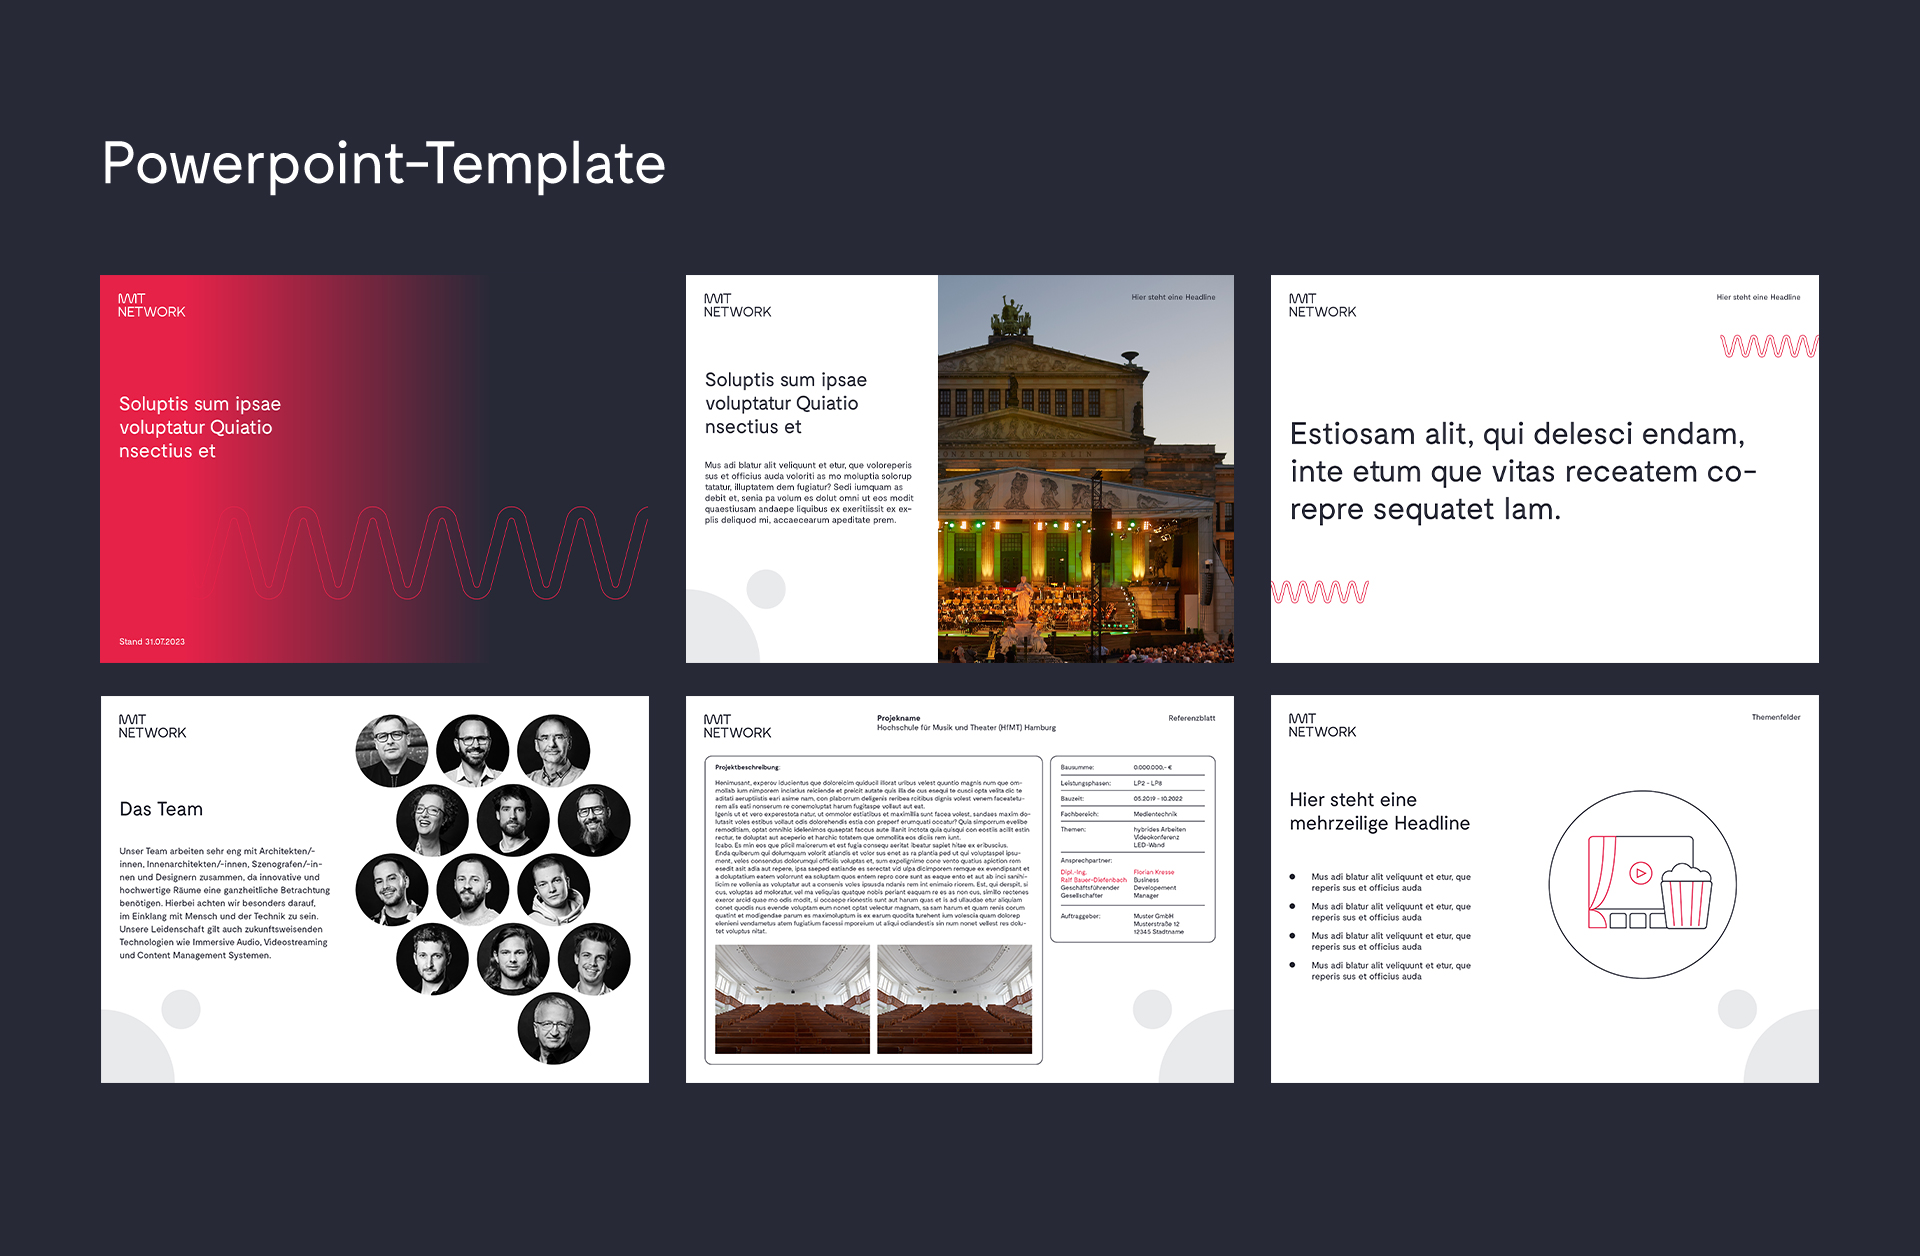 MMT_Network_Powerpoint_Template